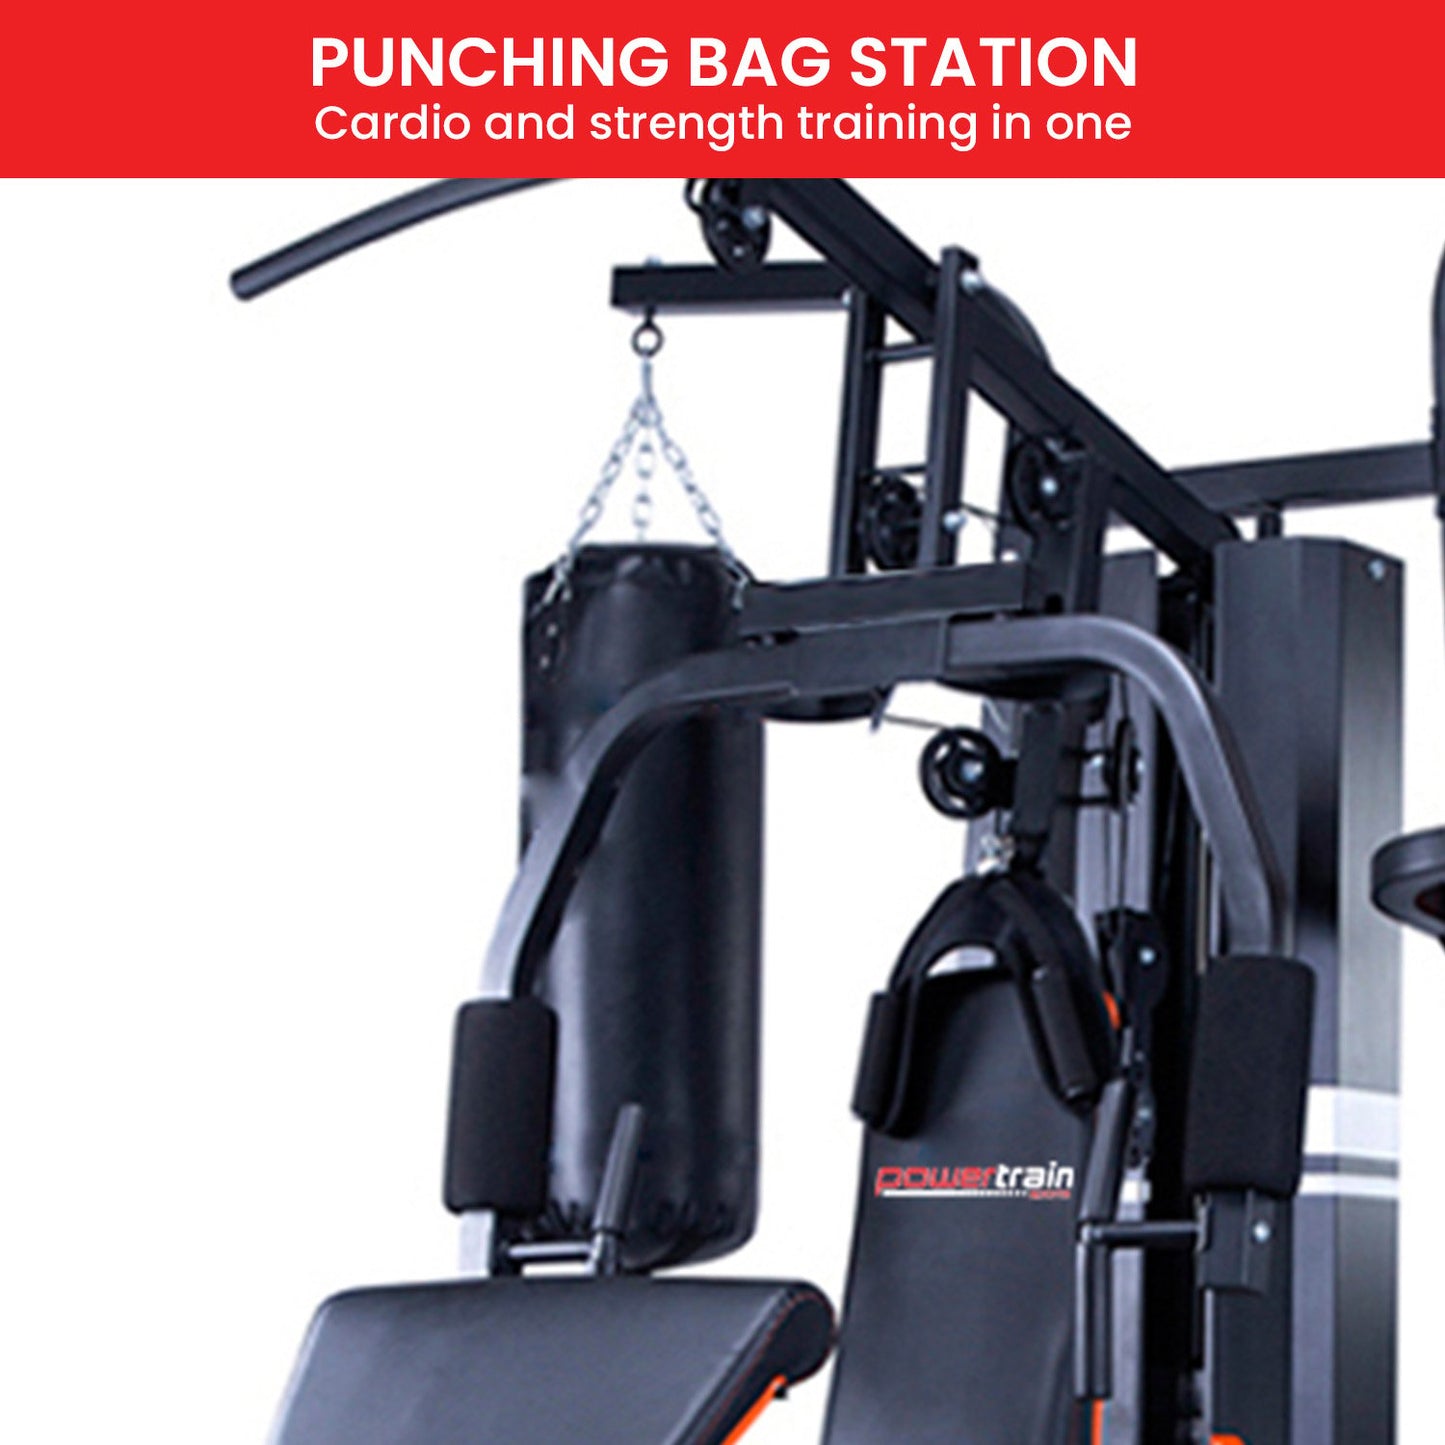 Powertrain Multi Station Home Gym 150lbs Weights Punching Bag